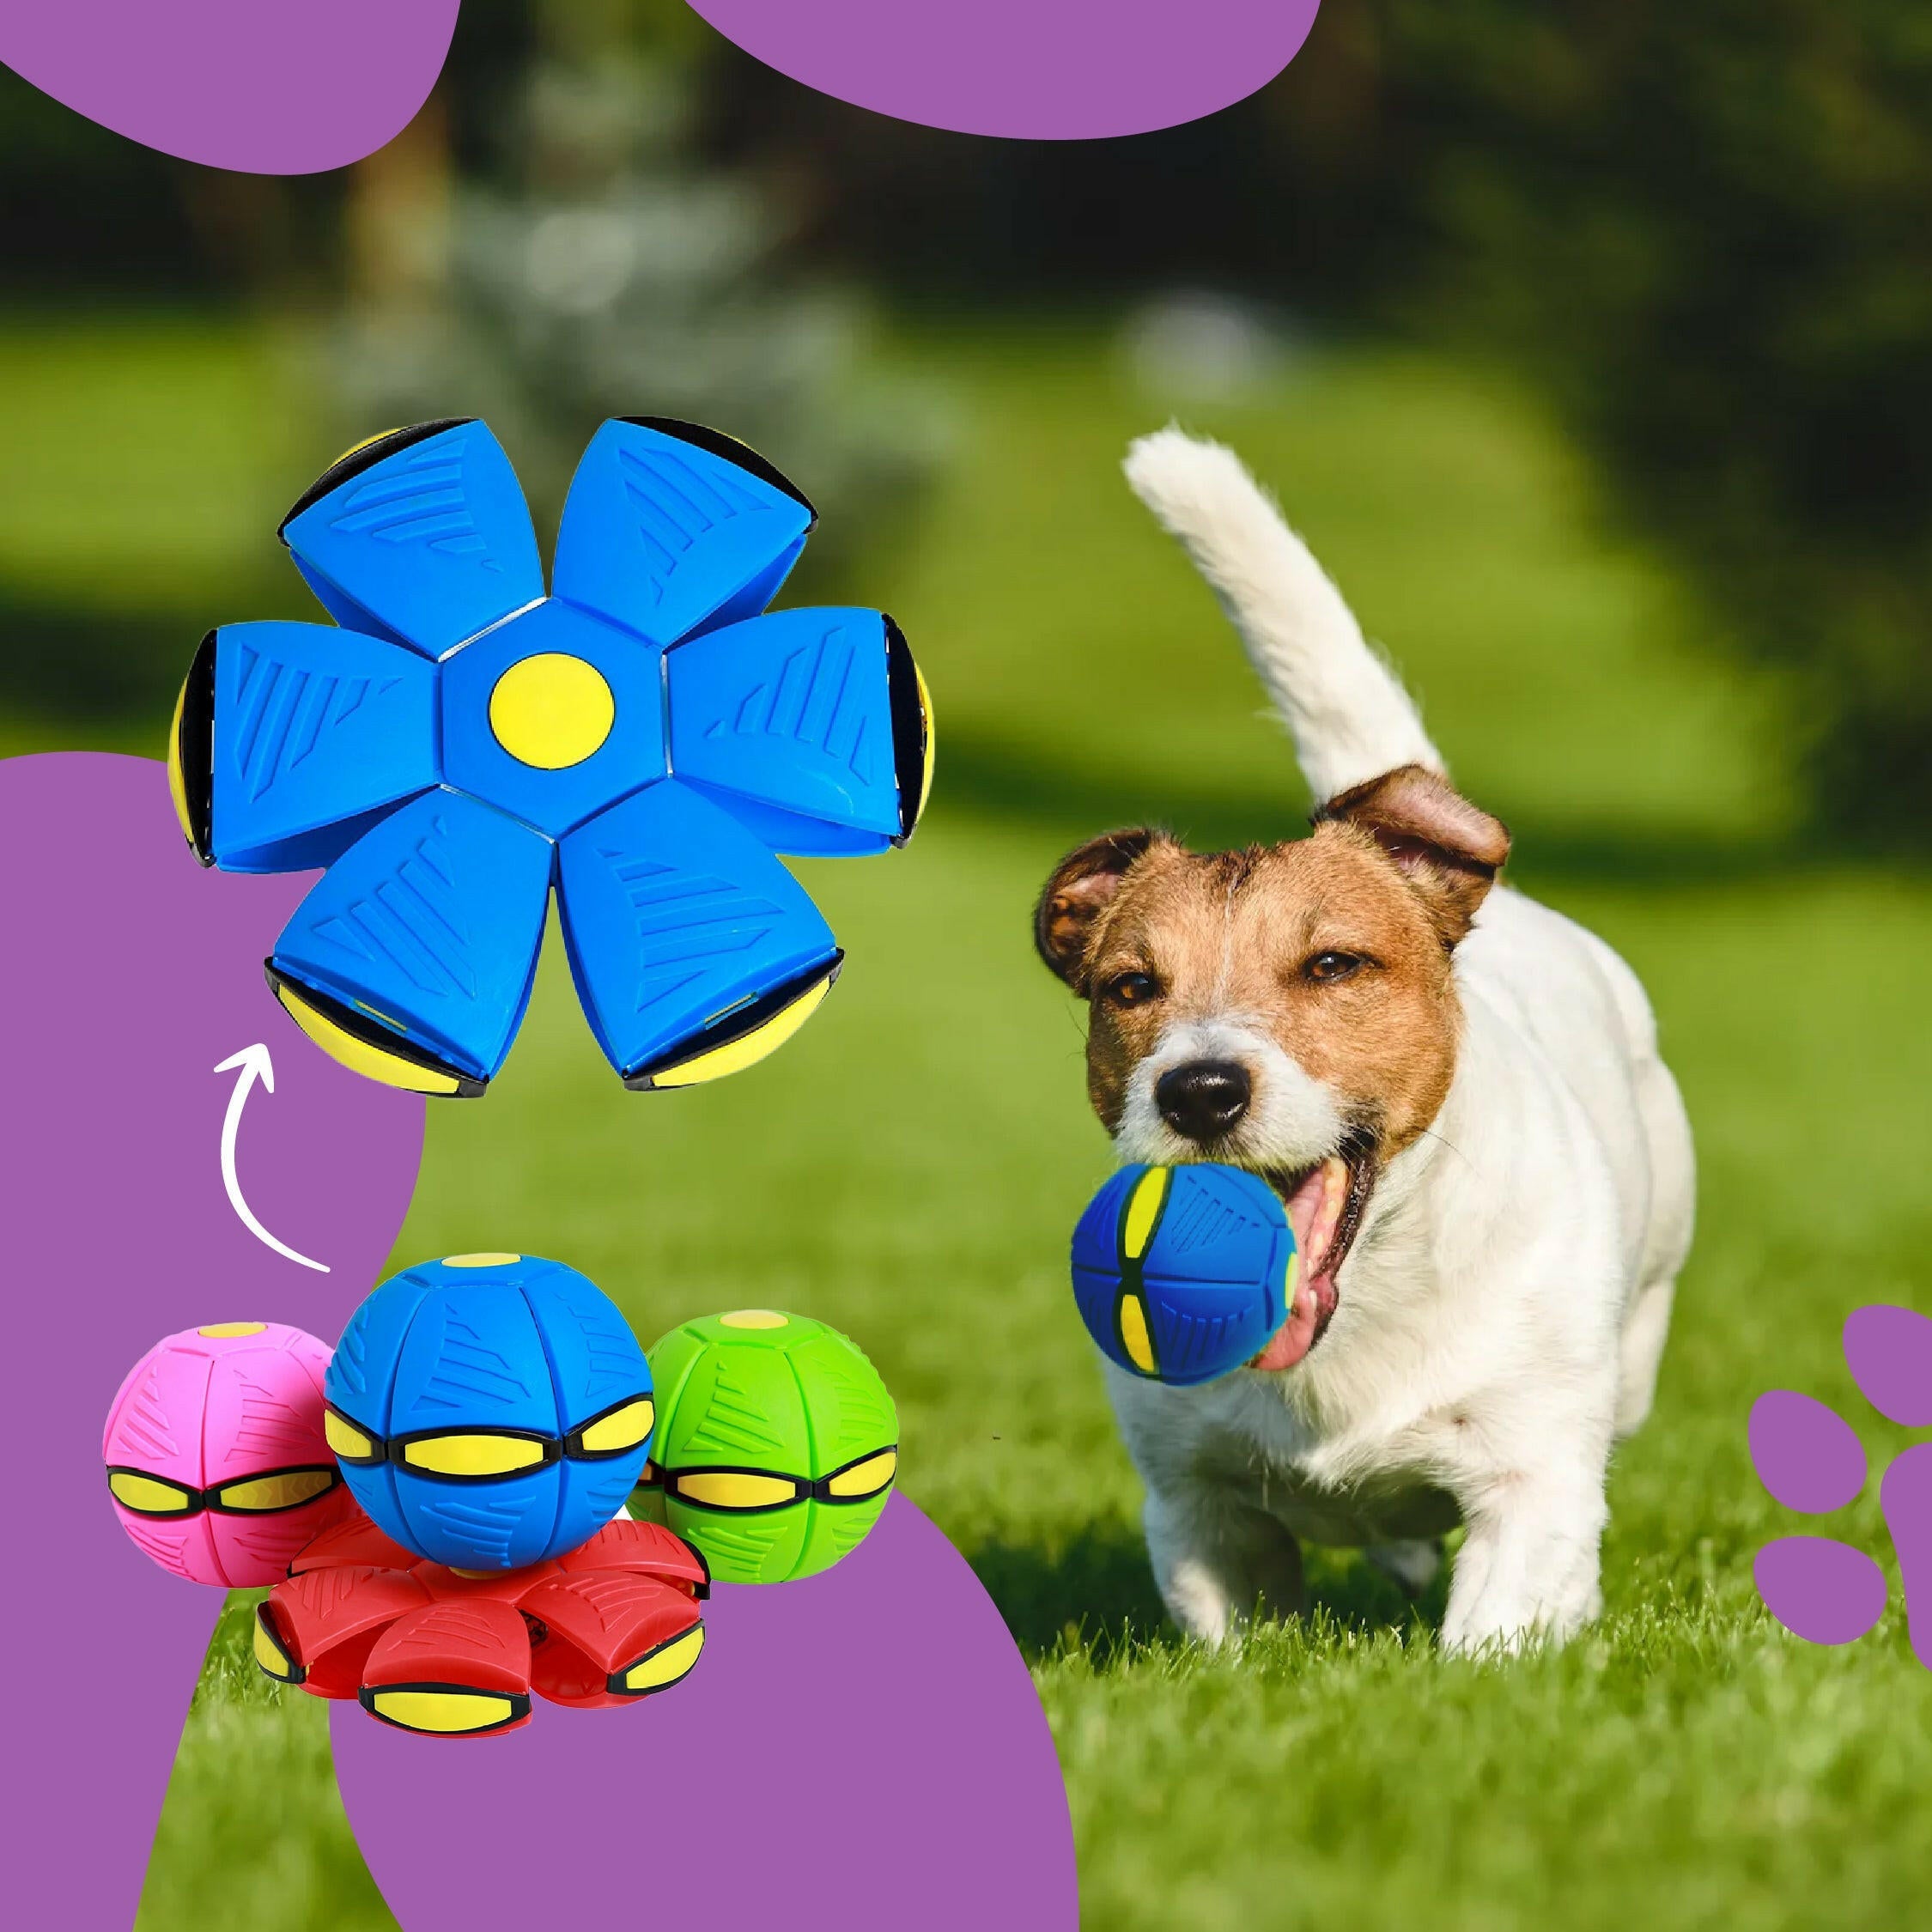 UFO Dog Frisbee - Magical Transformation for Interactive Outdoor Play and Training Fun!